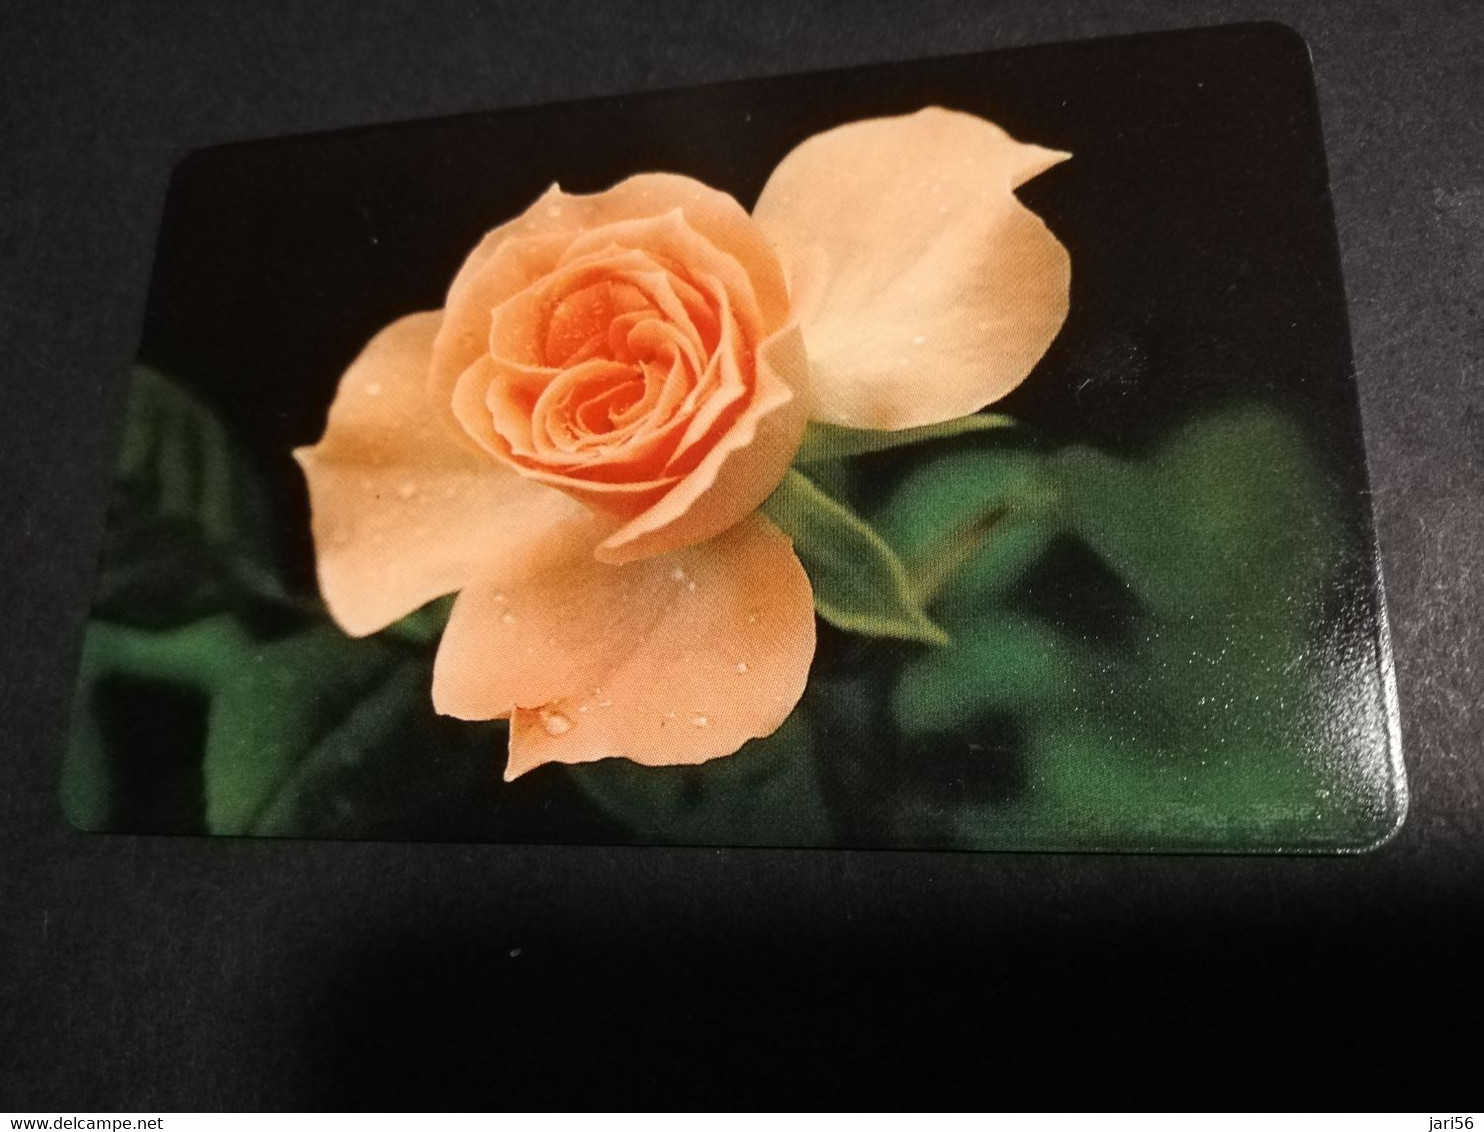 GREAT BRETAGNE  CHIPCARDS / TRIAL CARD 10 POUND   4438 BT / BACKSIDE ROSE /FLOWER PERFECT  CONDITION      **4454** - BT Generale